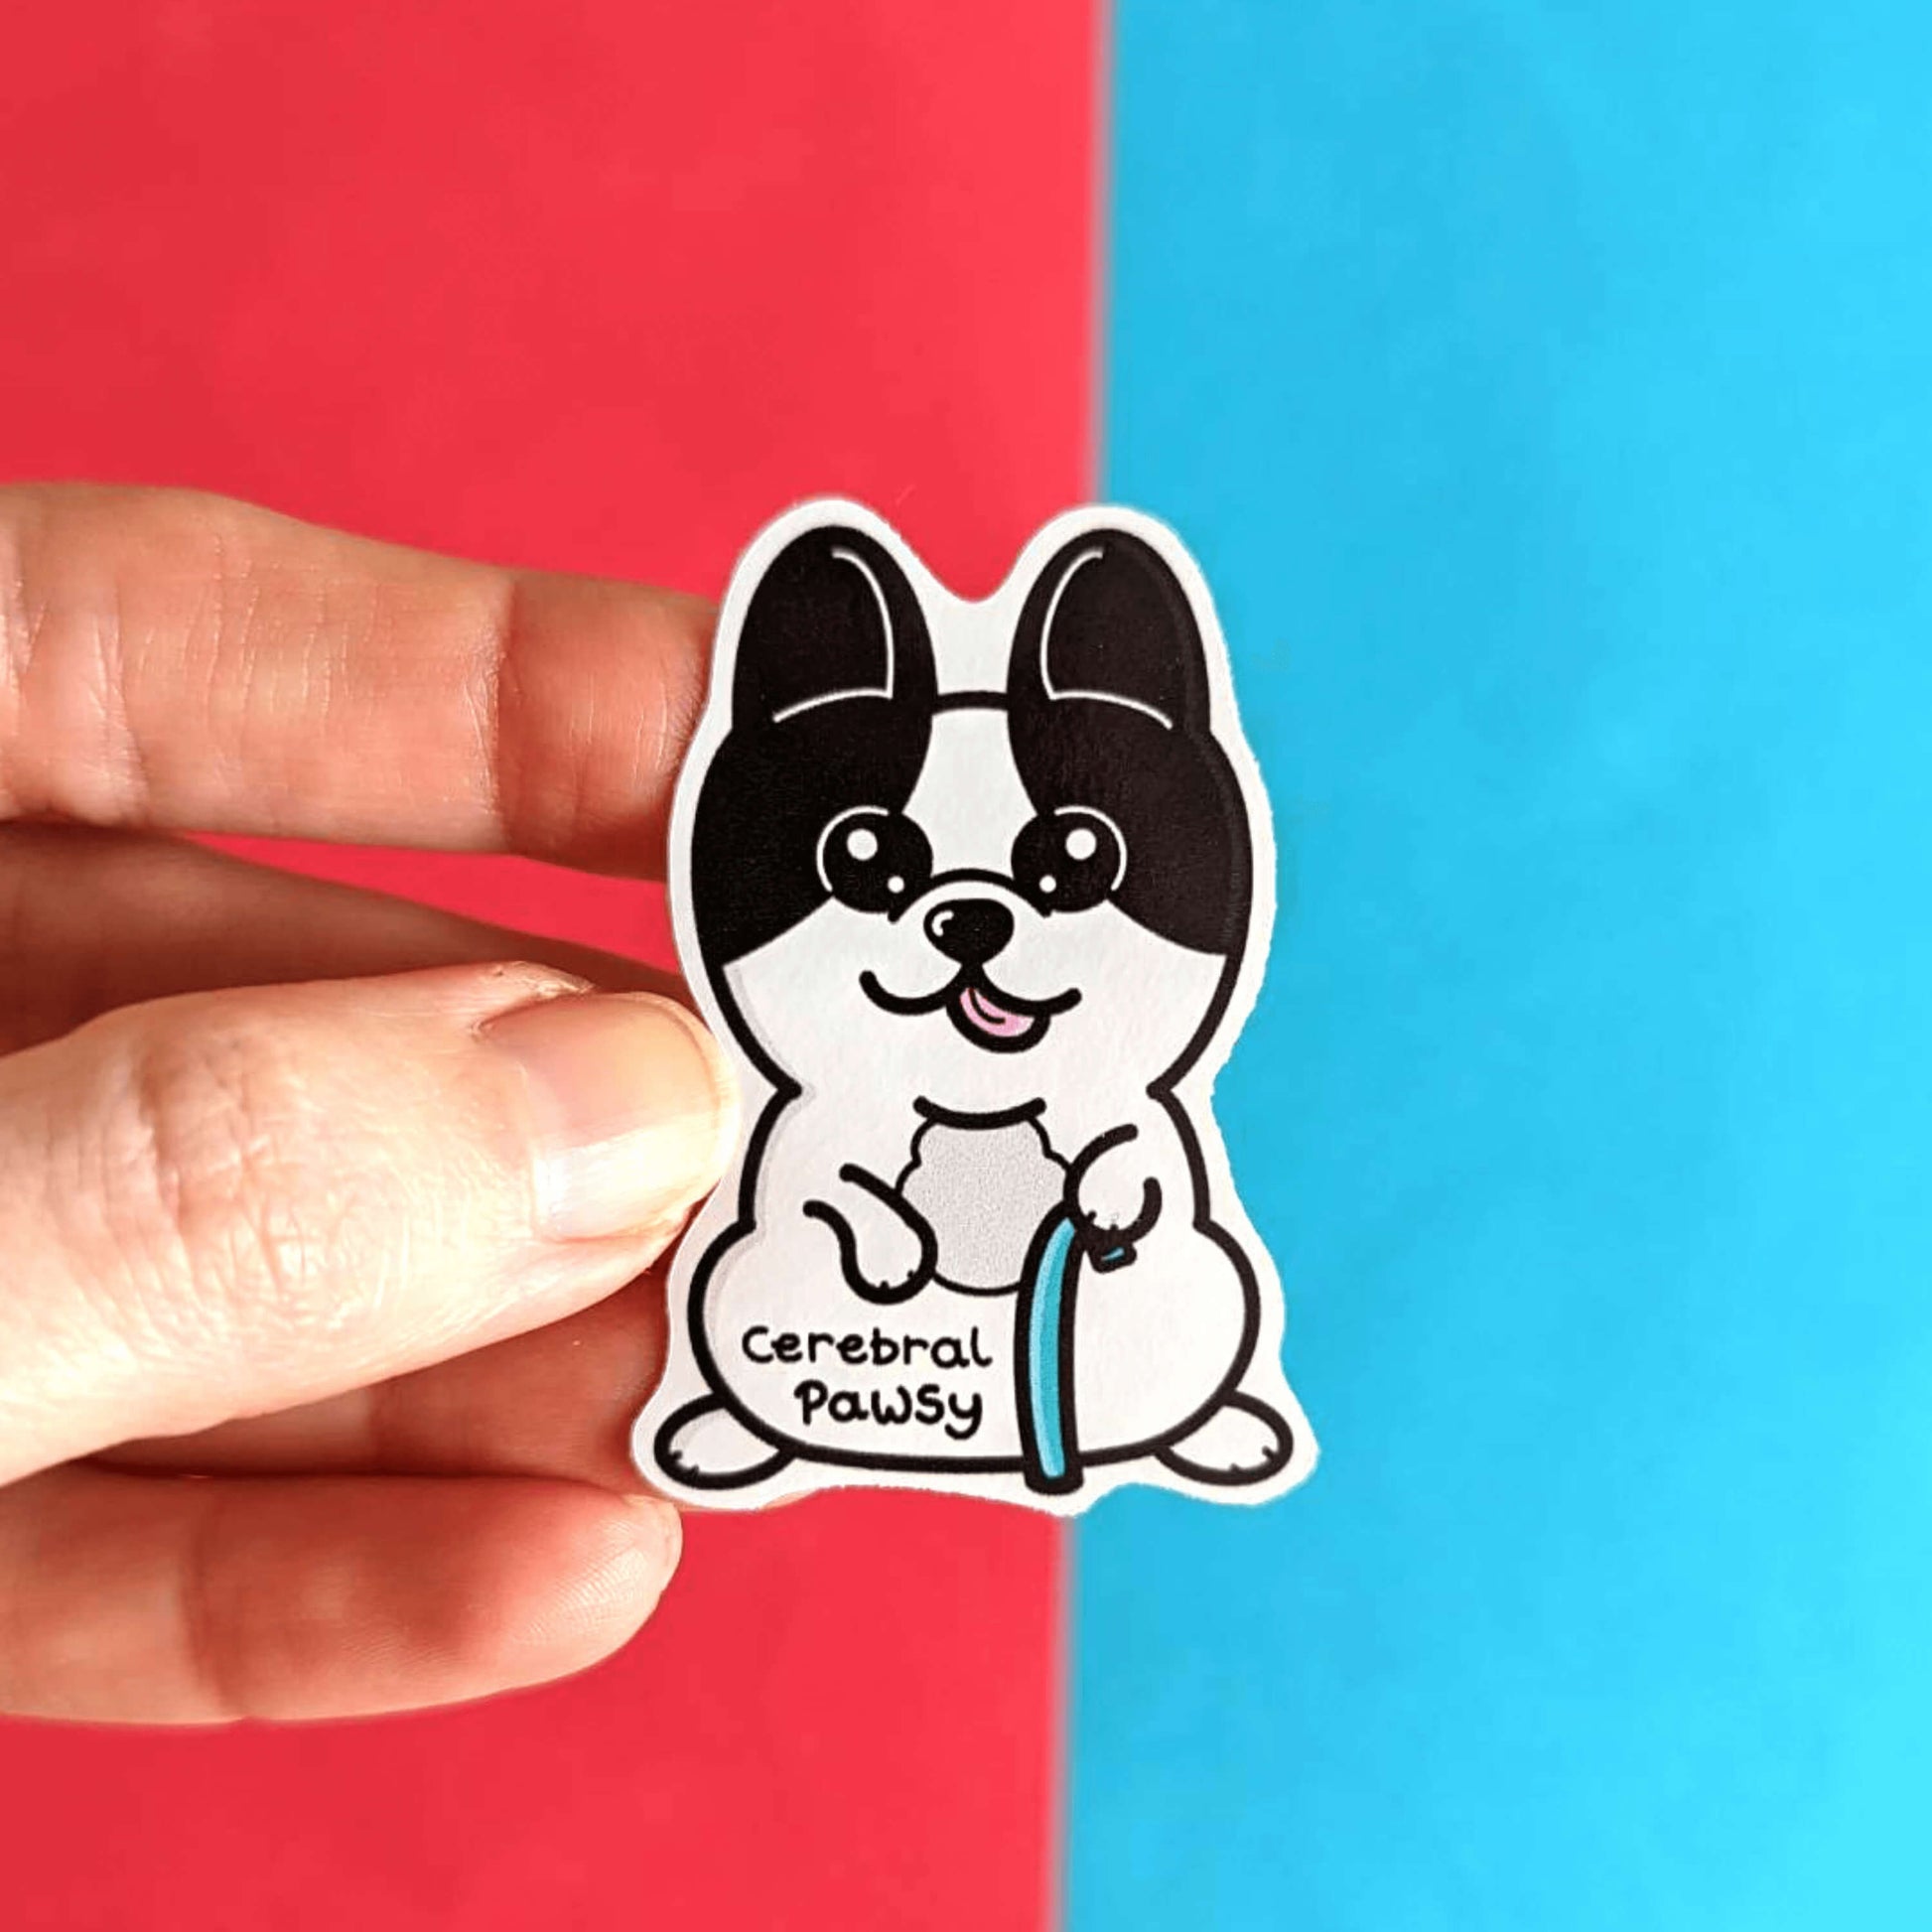 A hand holding the Cerebral Pawsy Sticker - Cerebral Palsy in front of a red and blue background. The sticker is a white and black dog with big eyes and pointy ears. The dog has it's pink tongue out and is standing on his back legs while holding a blue walking aid. 'Cerebral Pawsy' is written in black under it's tummy.